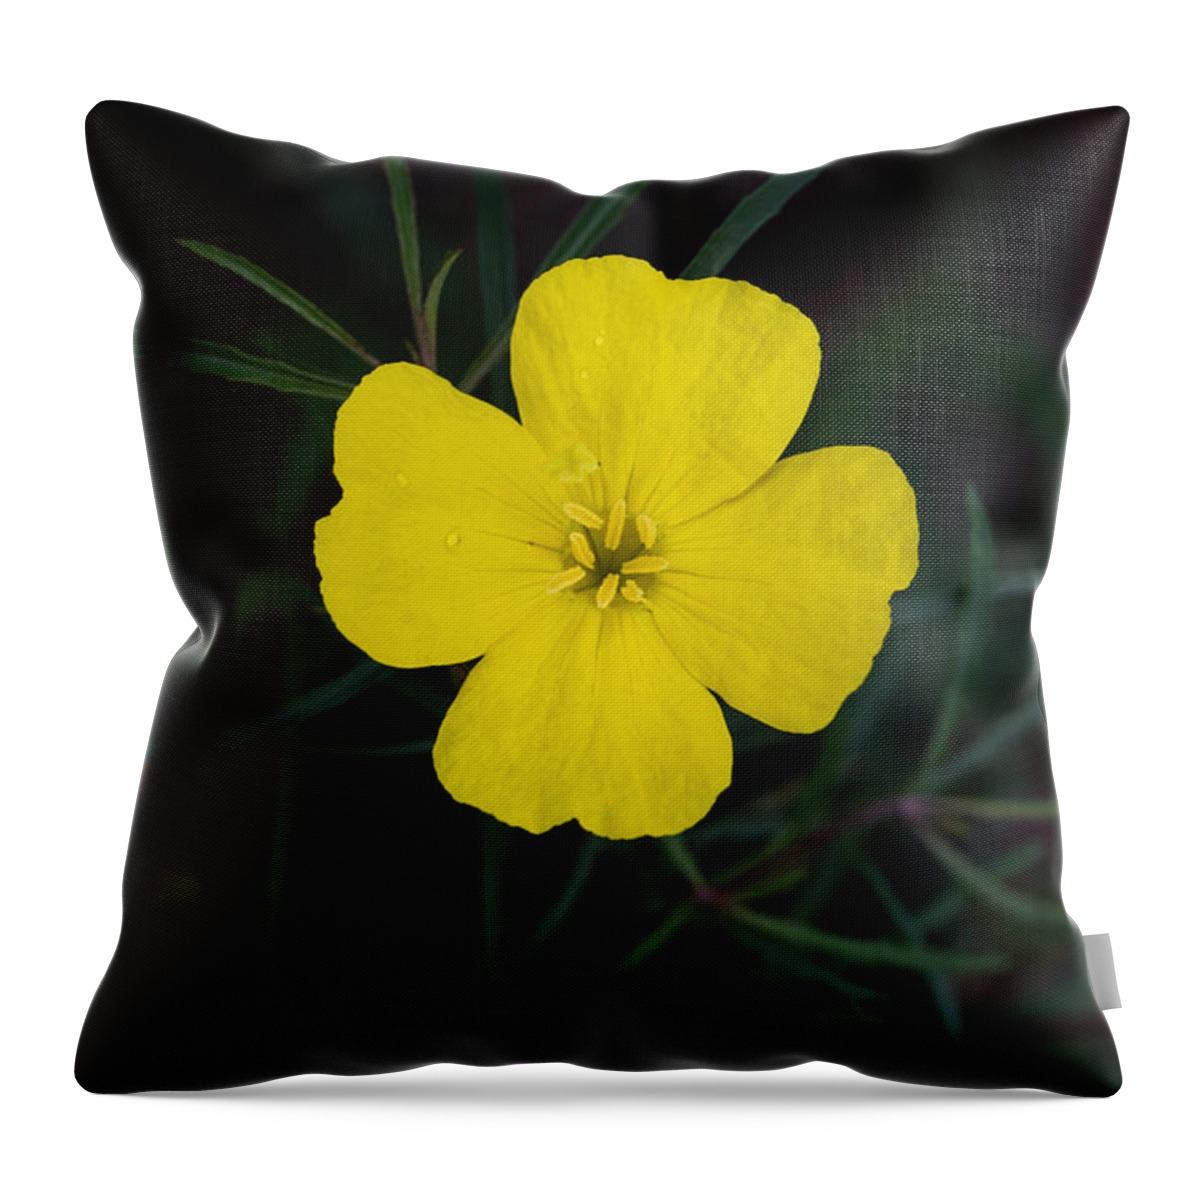 Square-bud Primrose Throw Pillow featuring the photograph Square-Bud Primrose Flower by Steven Schwartzman